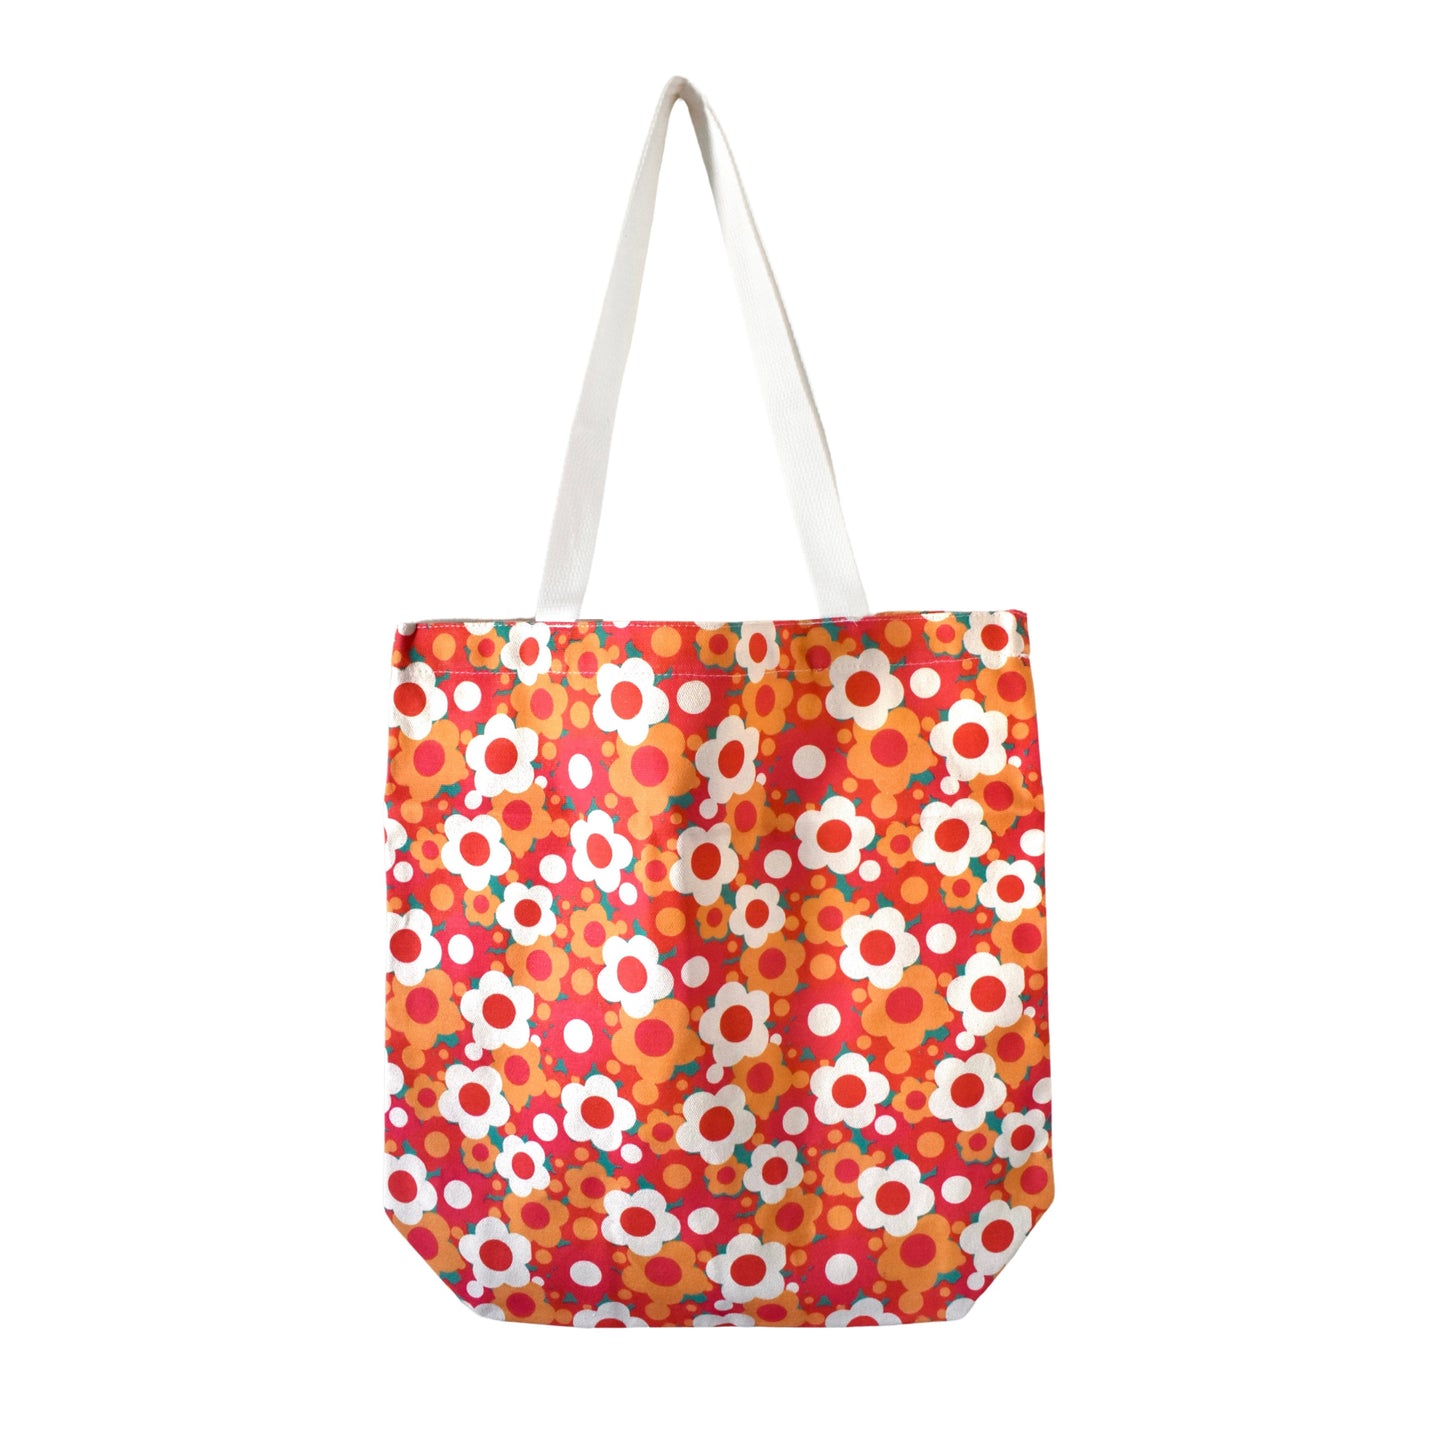 Stay Groovy Canvas Tote Bag